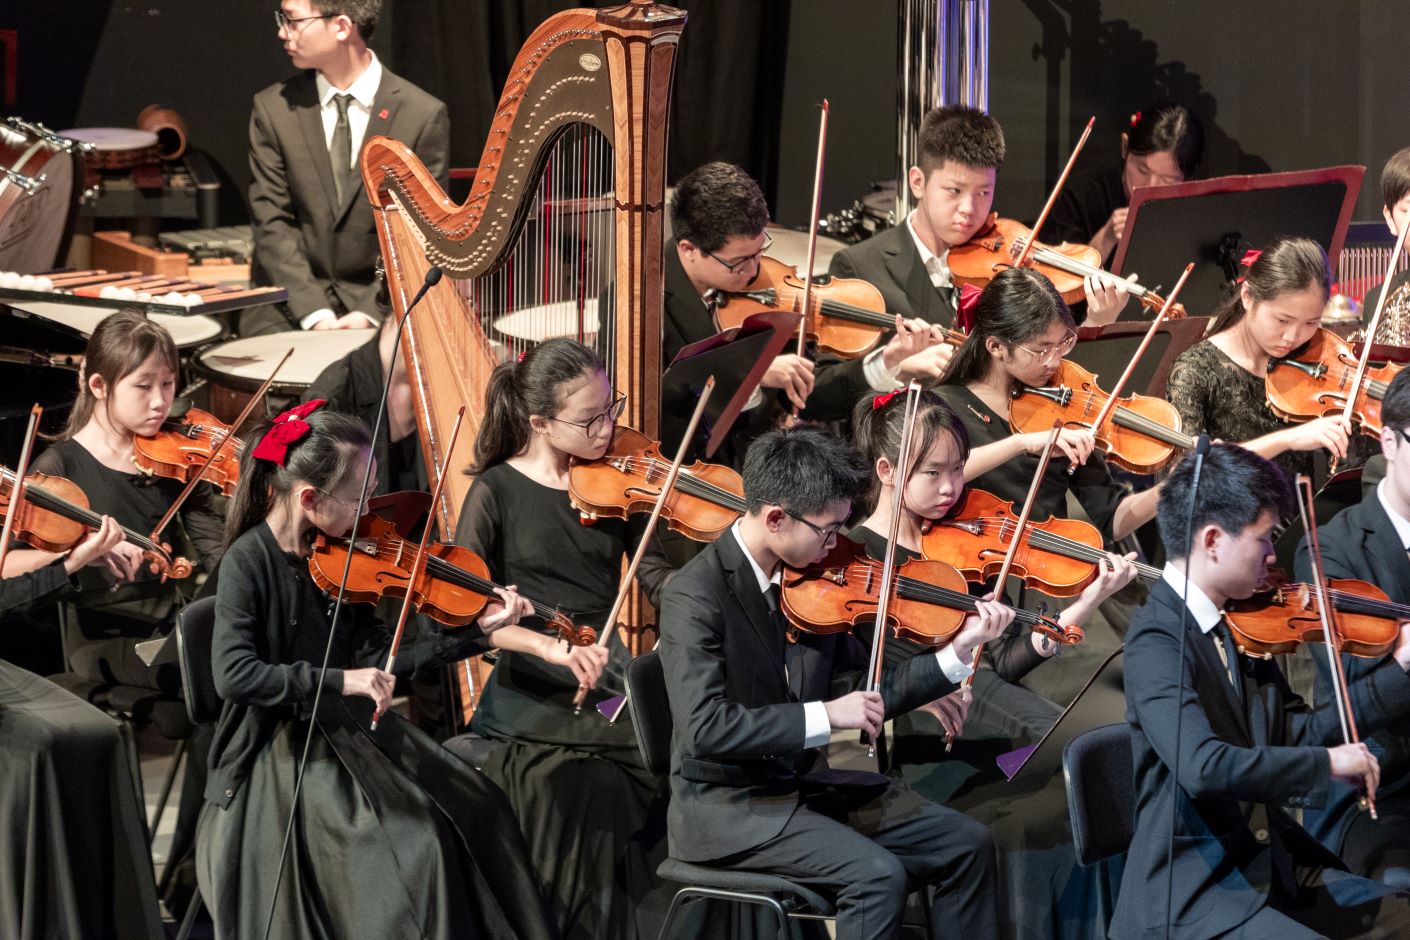 How we nurture holistic development and wellbeing-The Chinese Philharmonic Youth Orchestra Visits NAS Abu Dhabi-Chris-6238 - SMALLER